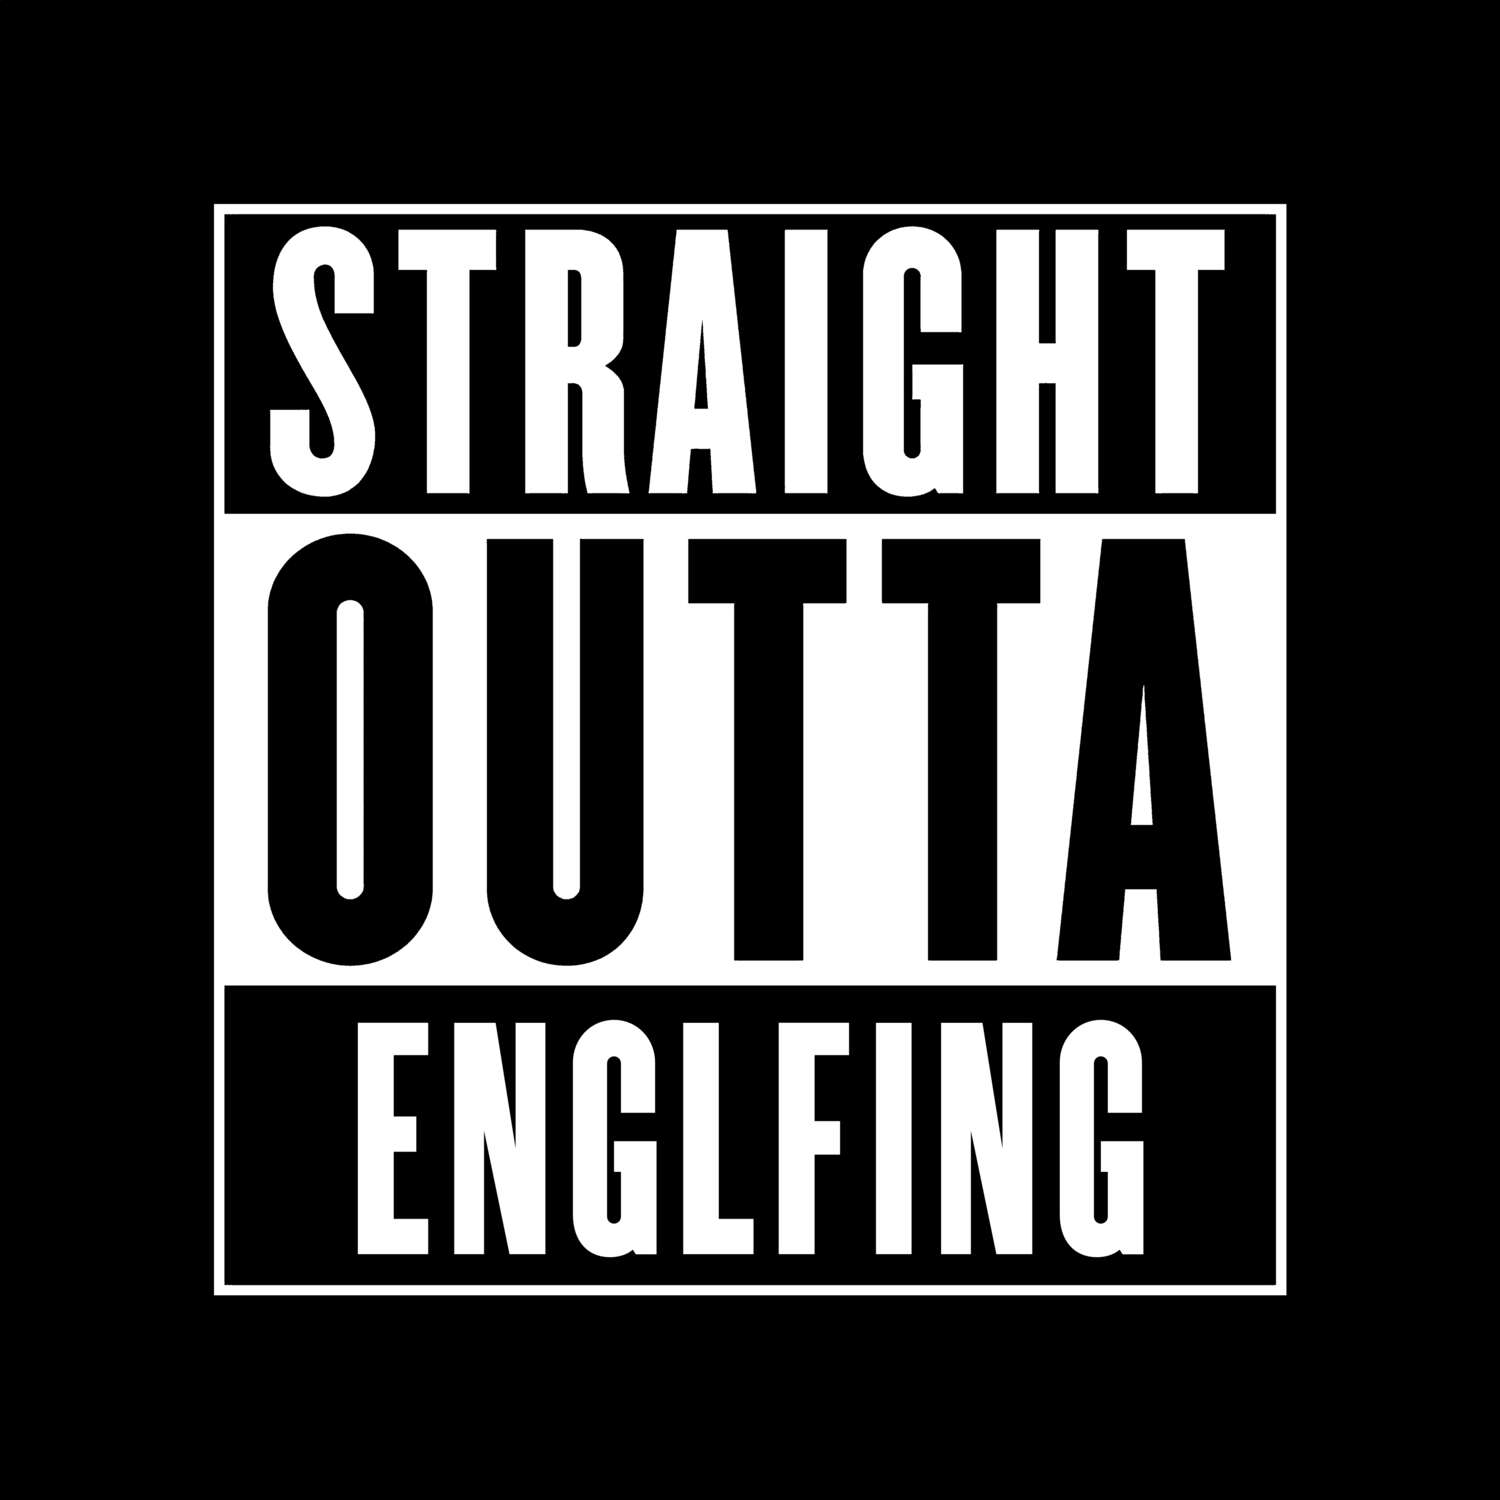 Englfing T-Shirt »Straight Outta«